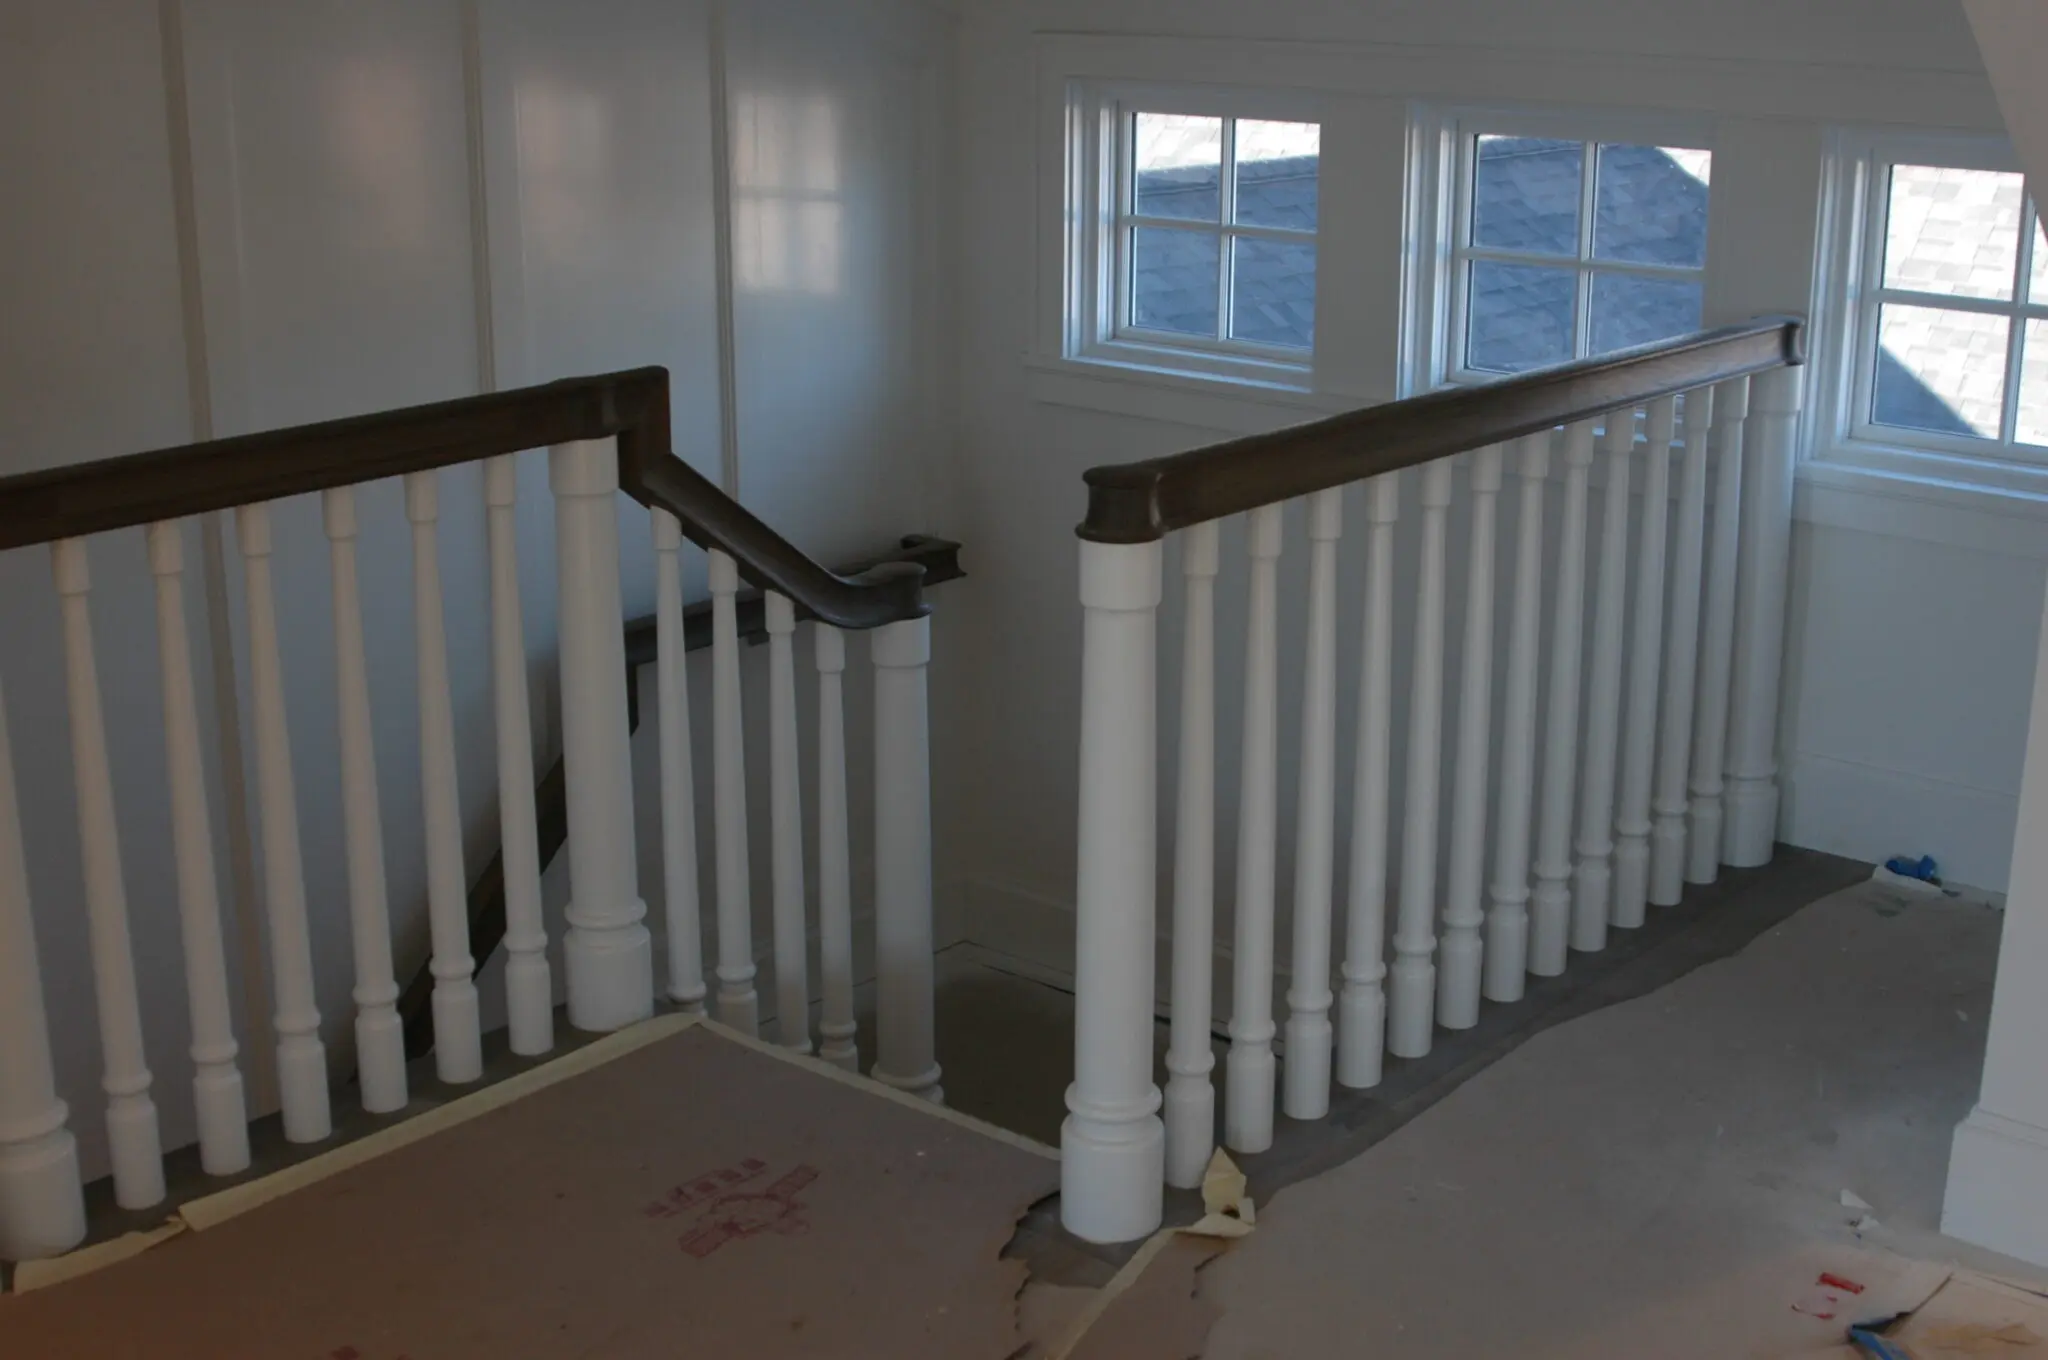 Traditional railing interior design with painted stairs